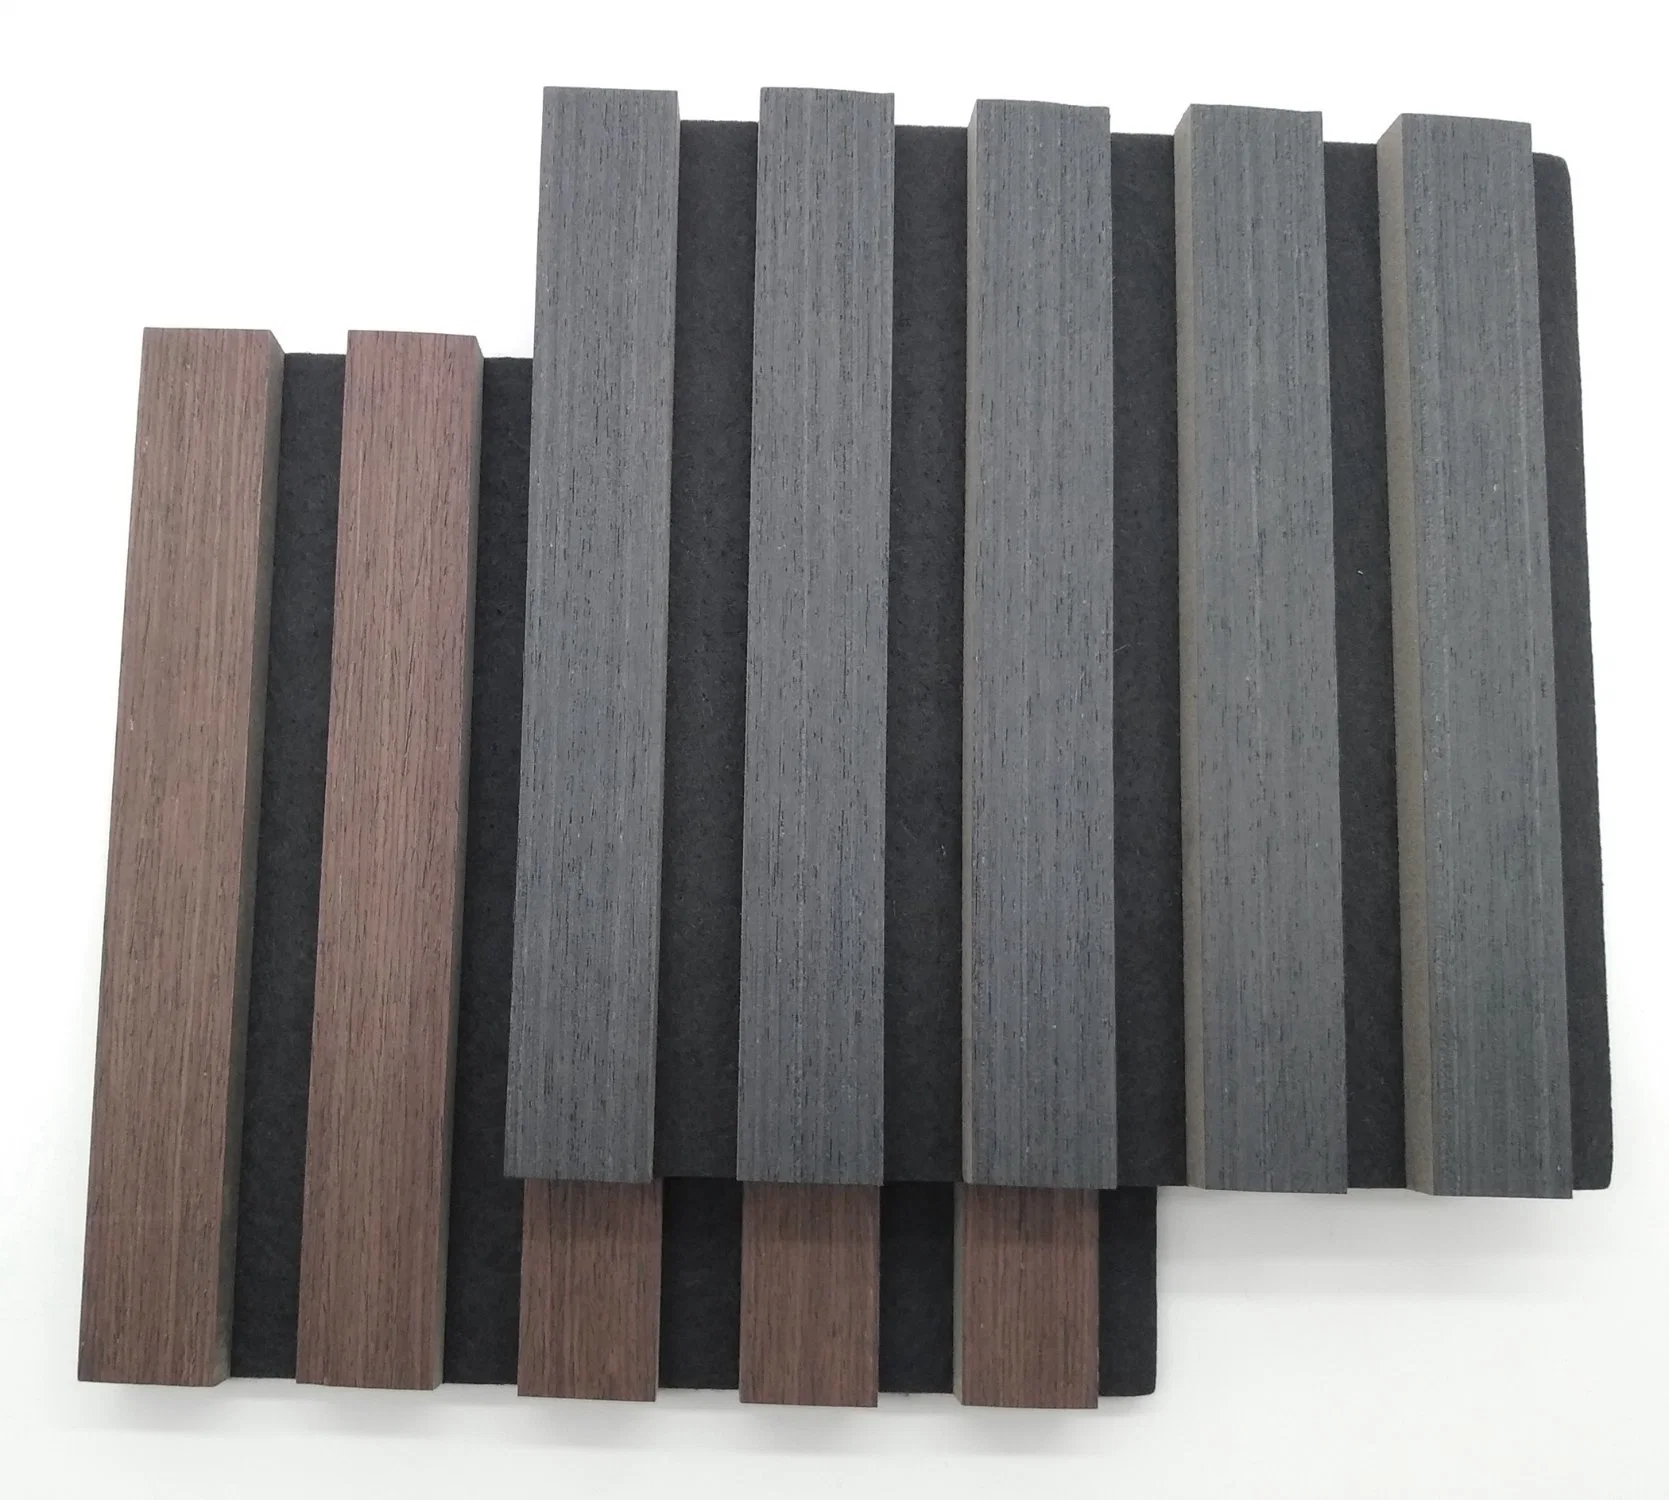 Wood Slat Acoustic Panel Wall Ceiling Soundproofing Interior Decorated Building Material